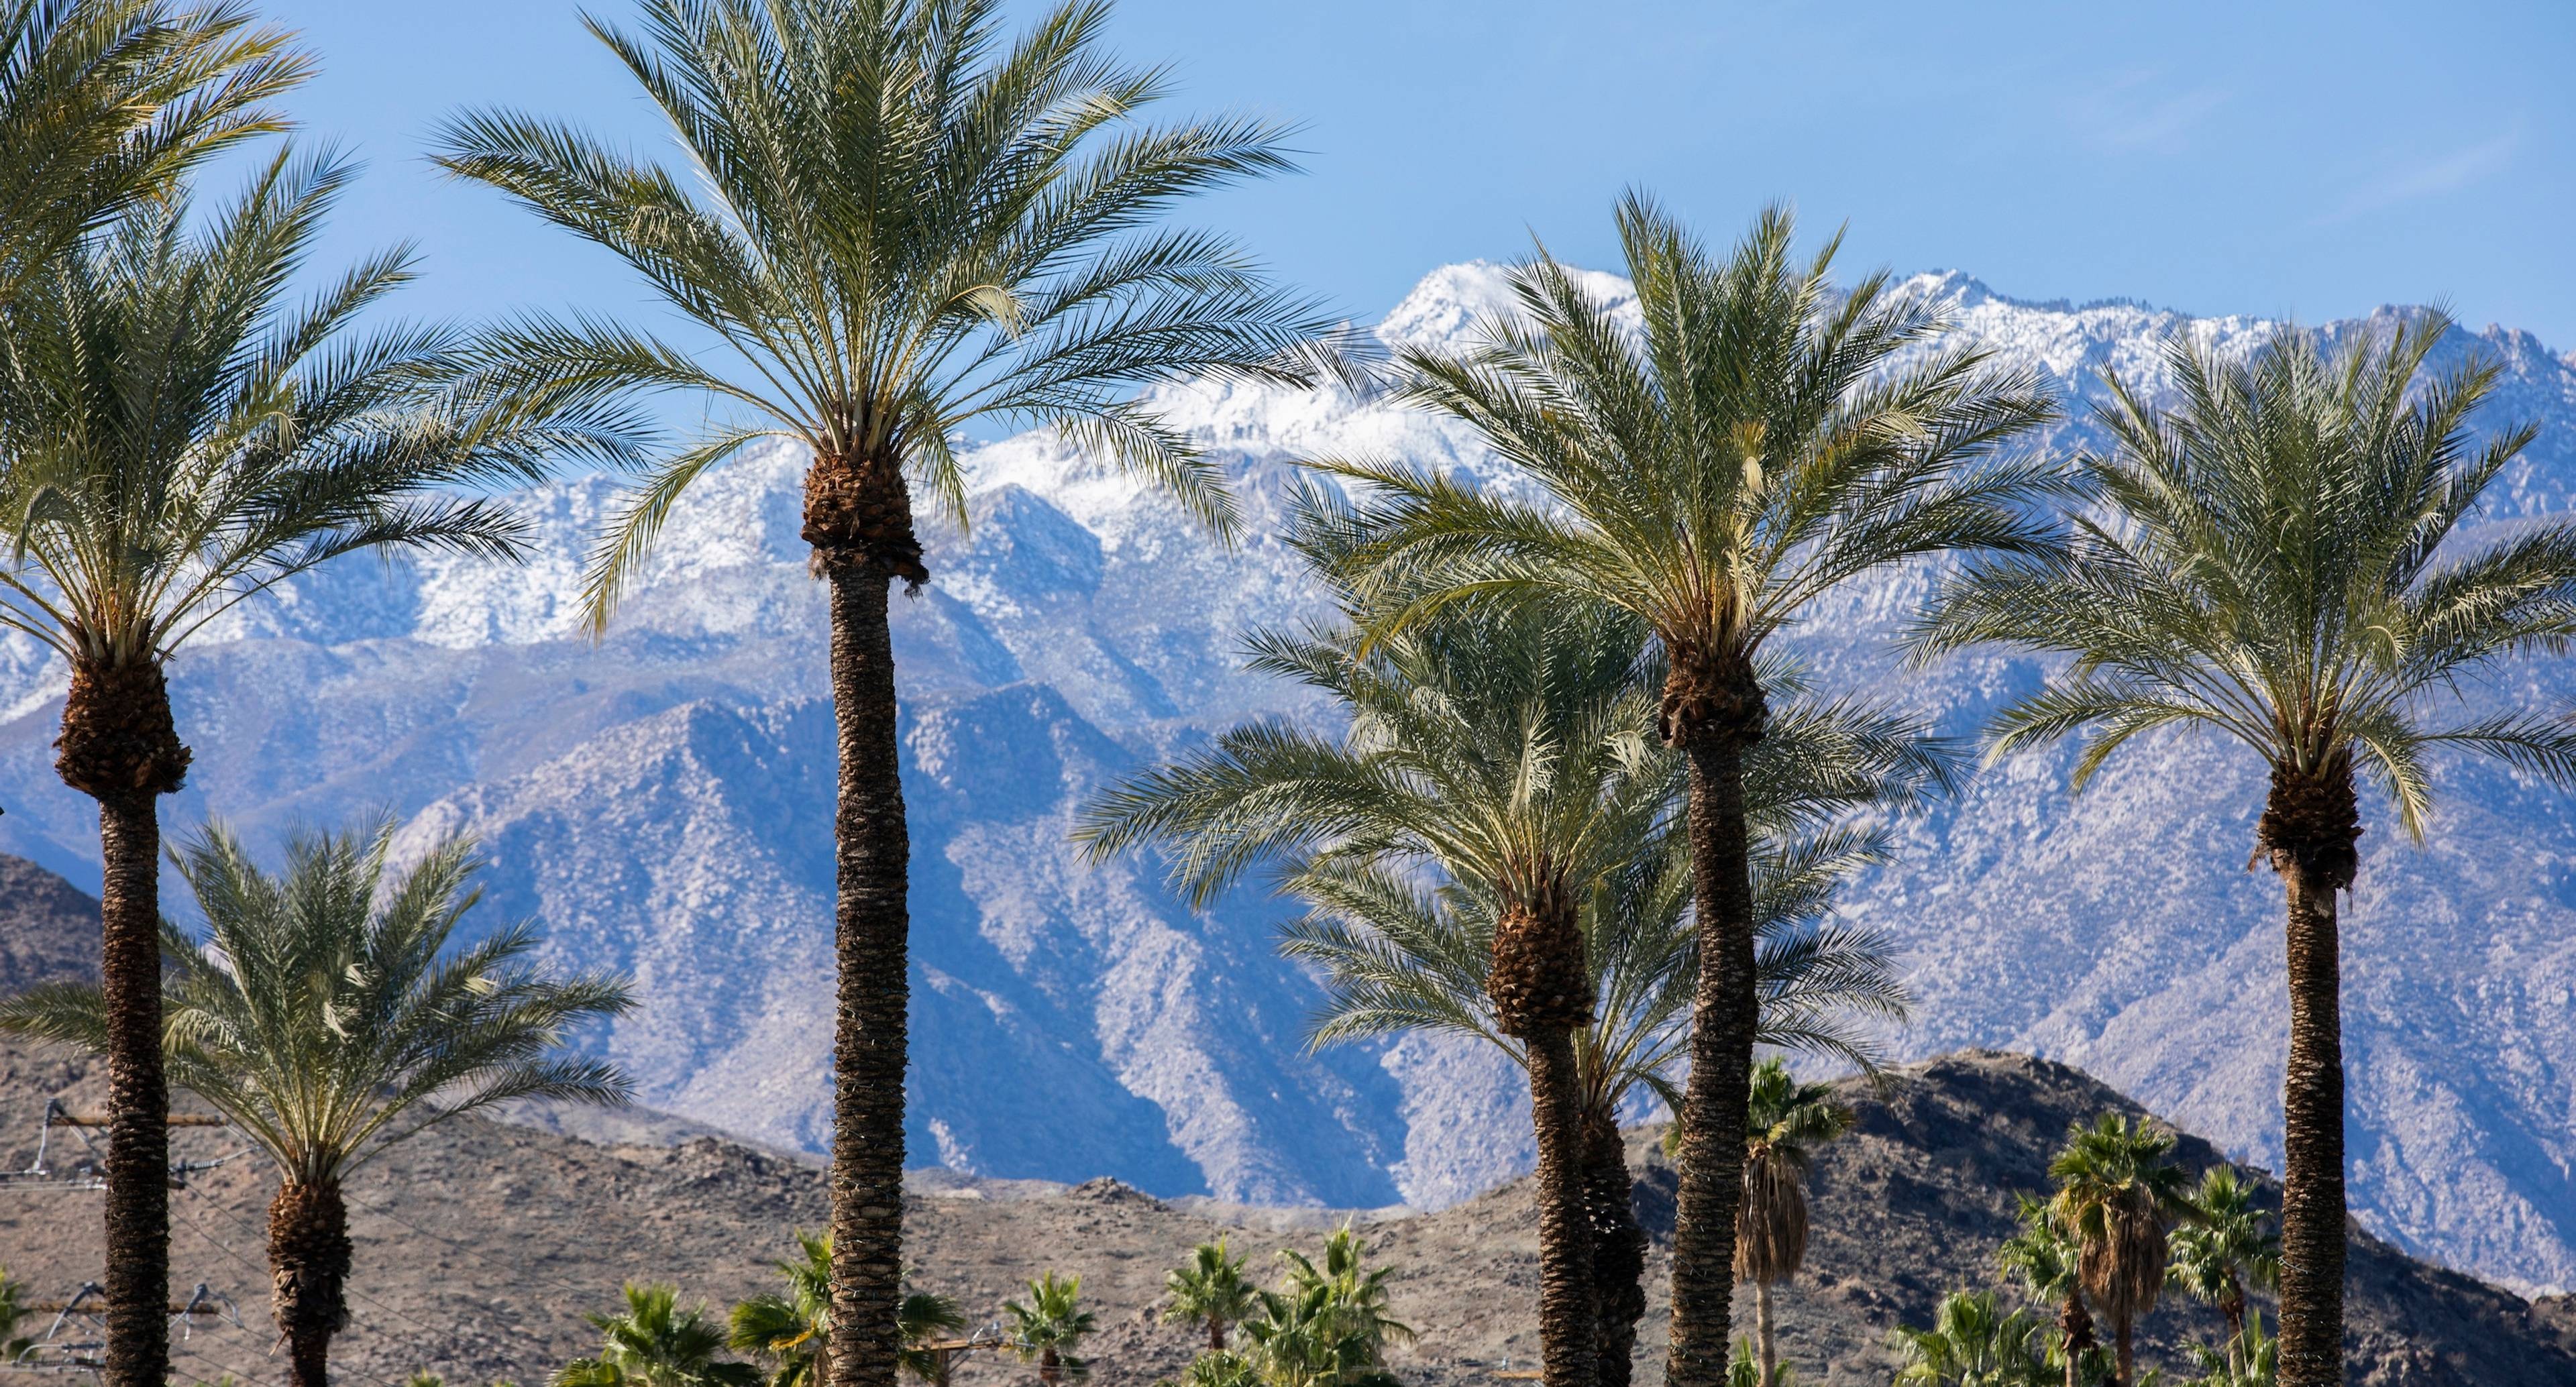 Discover the Wonders of the Desert on the Return to Los Angeles, via the Salton Sea and Coachella Valley